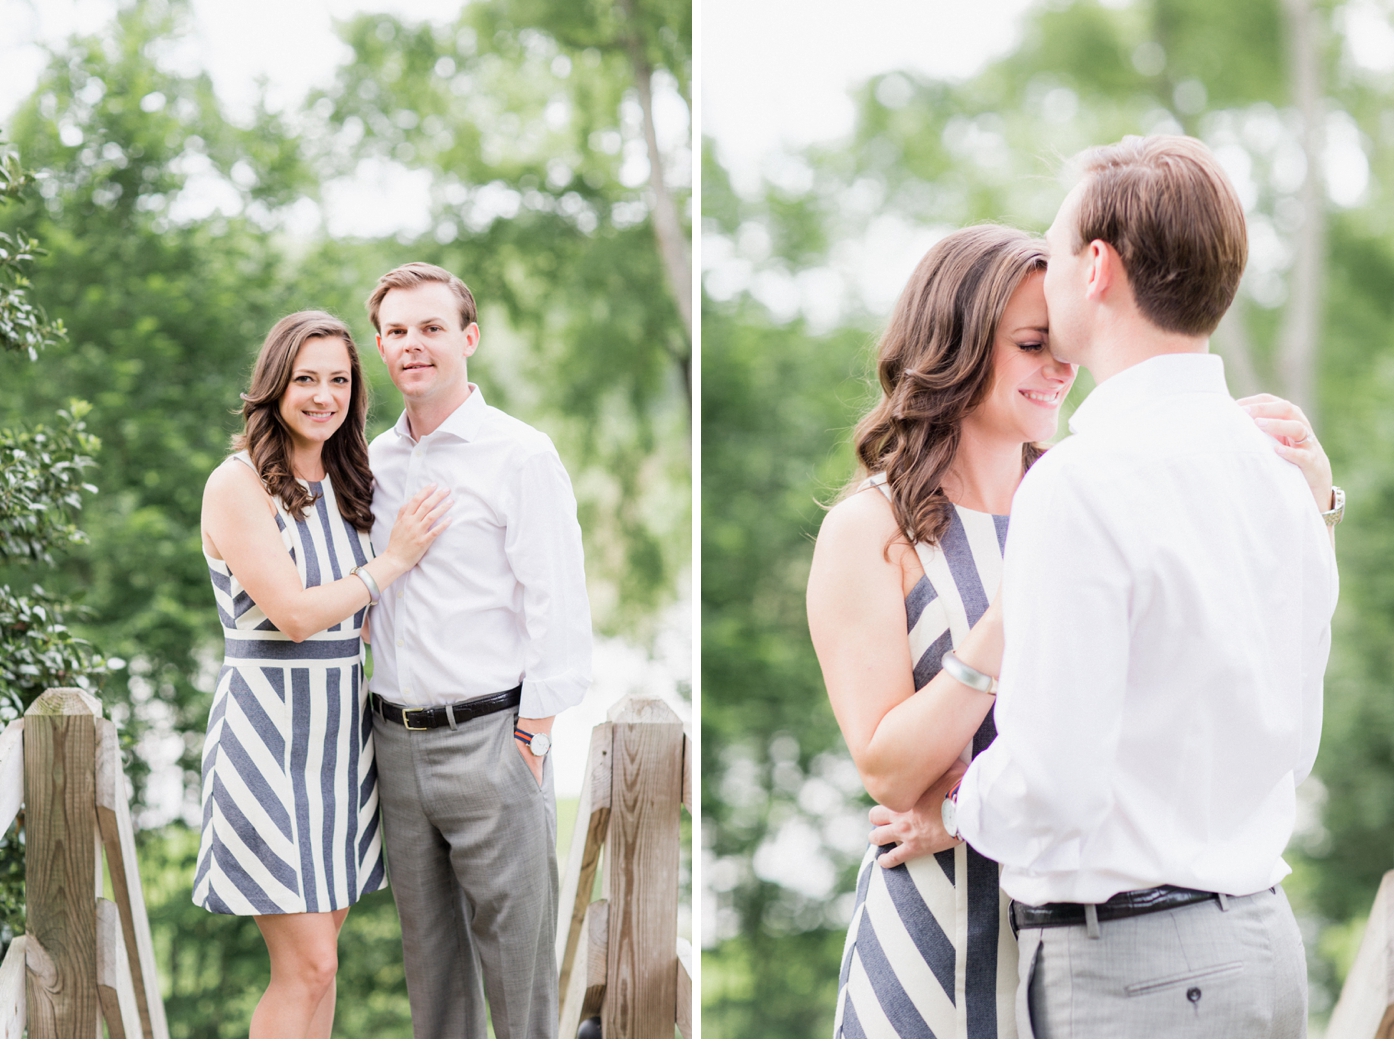 James River Engagement Session in Richmond, VA by Alisandra Photography